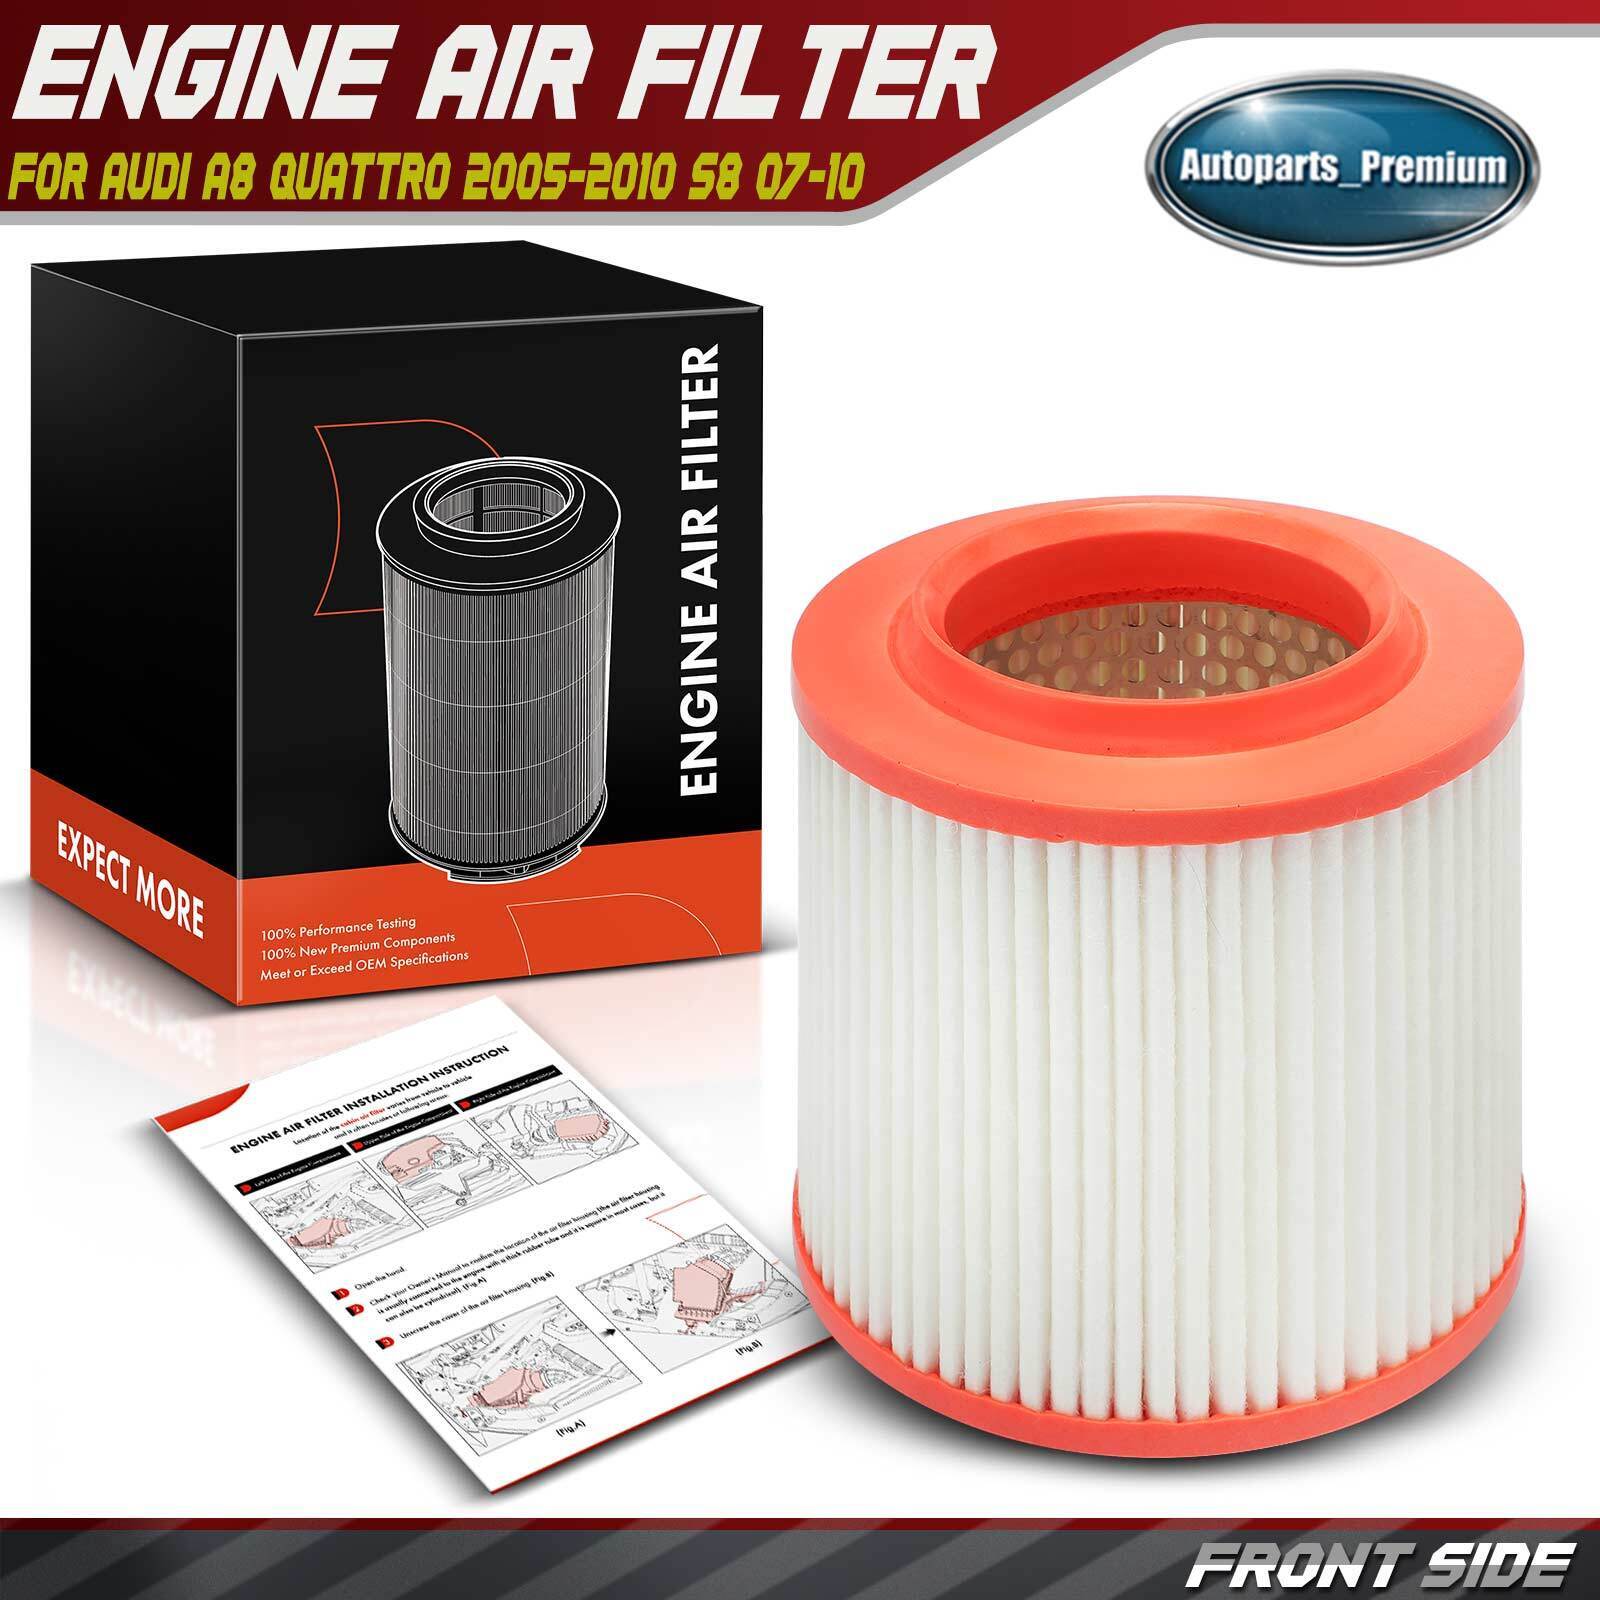 New Front Engine Air Filter for Audi A8 Quattro 05-10 W12 6.0L S8 07-10 V10 5.2L